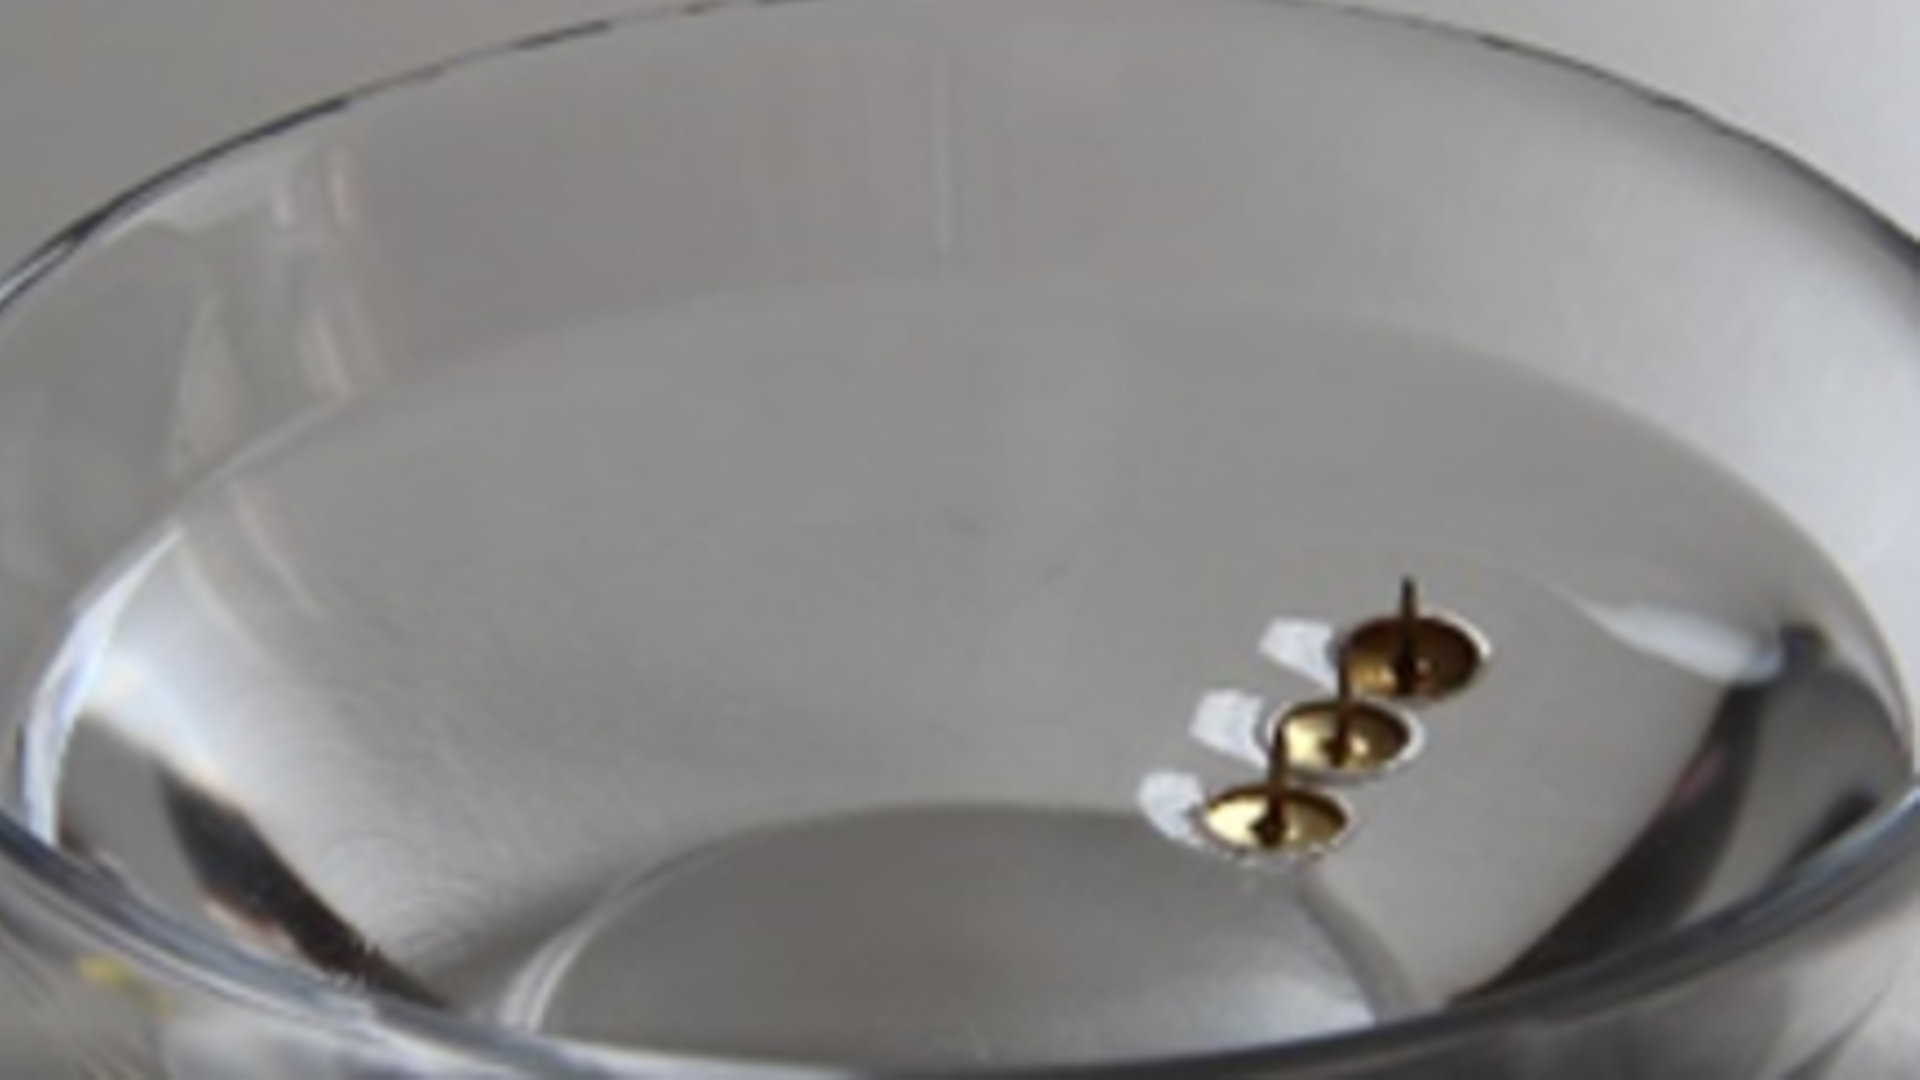 three thumbtacks floating on water in a bowl